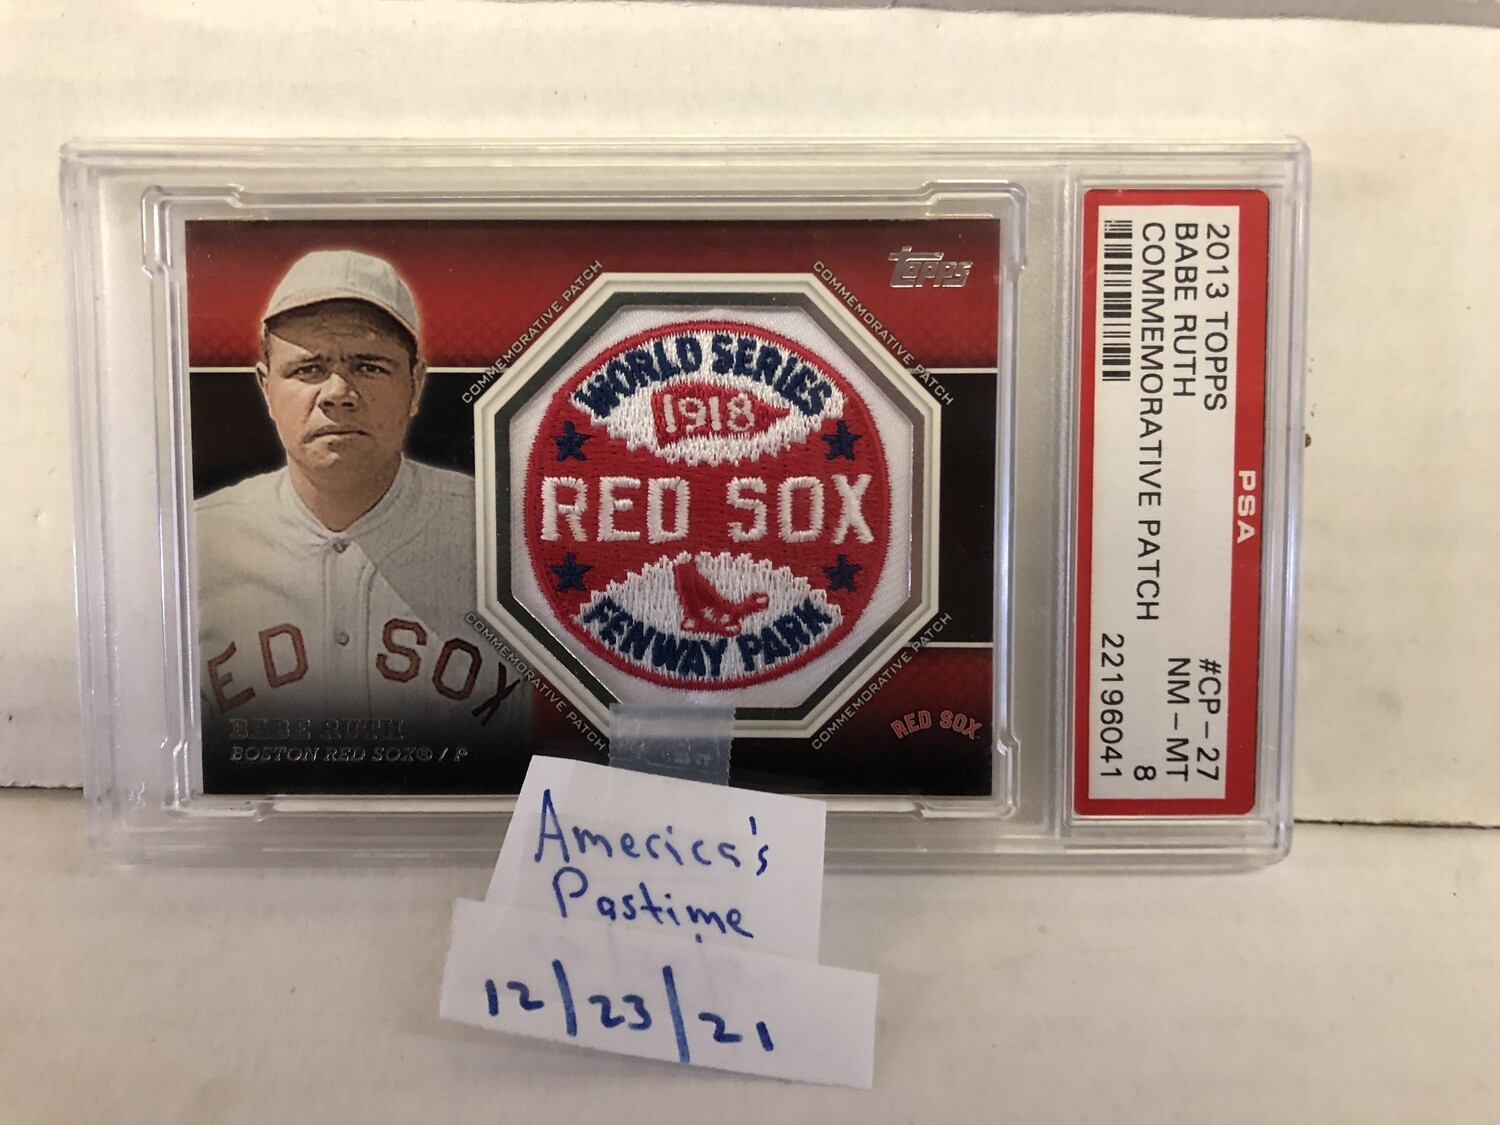 2013 Topps Babe Ruth Red Sox World Series Patch 1918 PSA 8